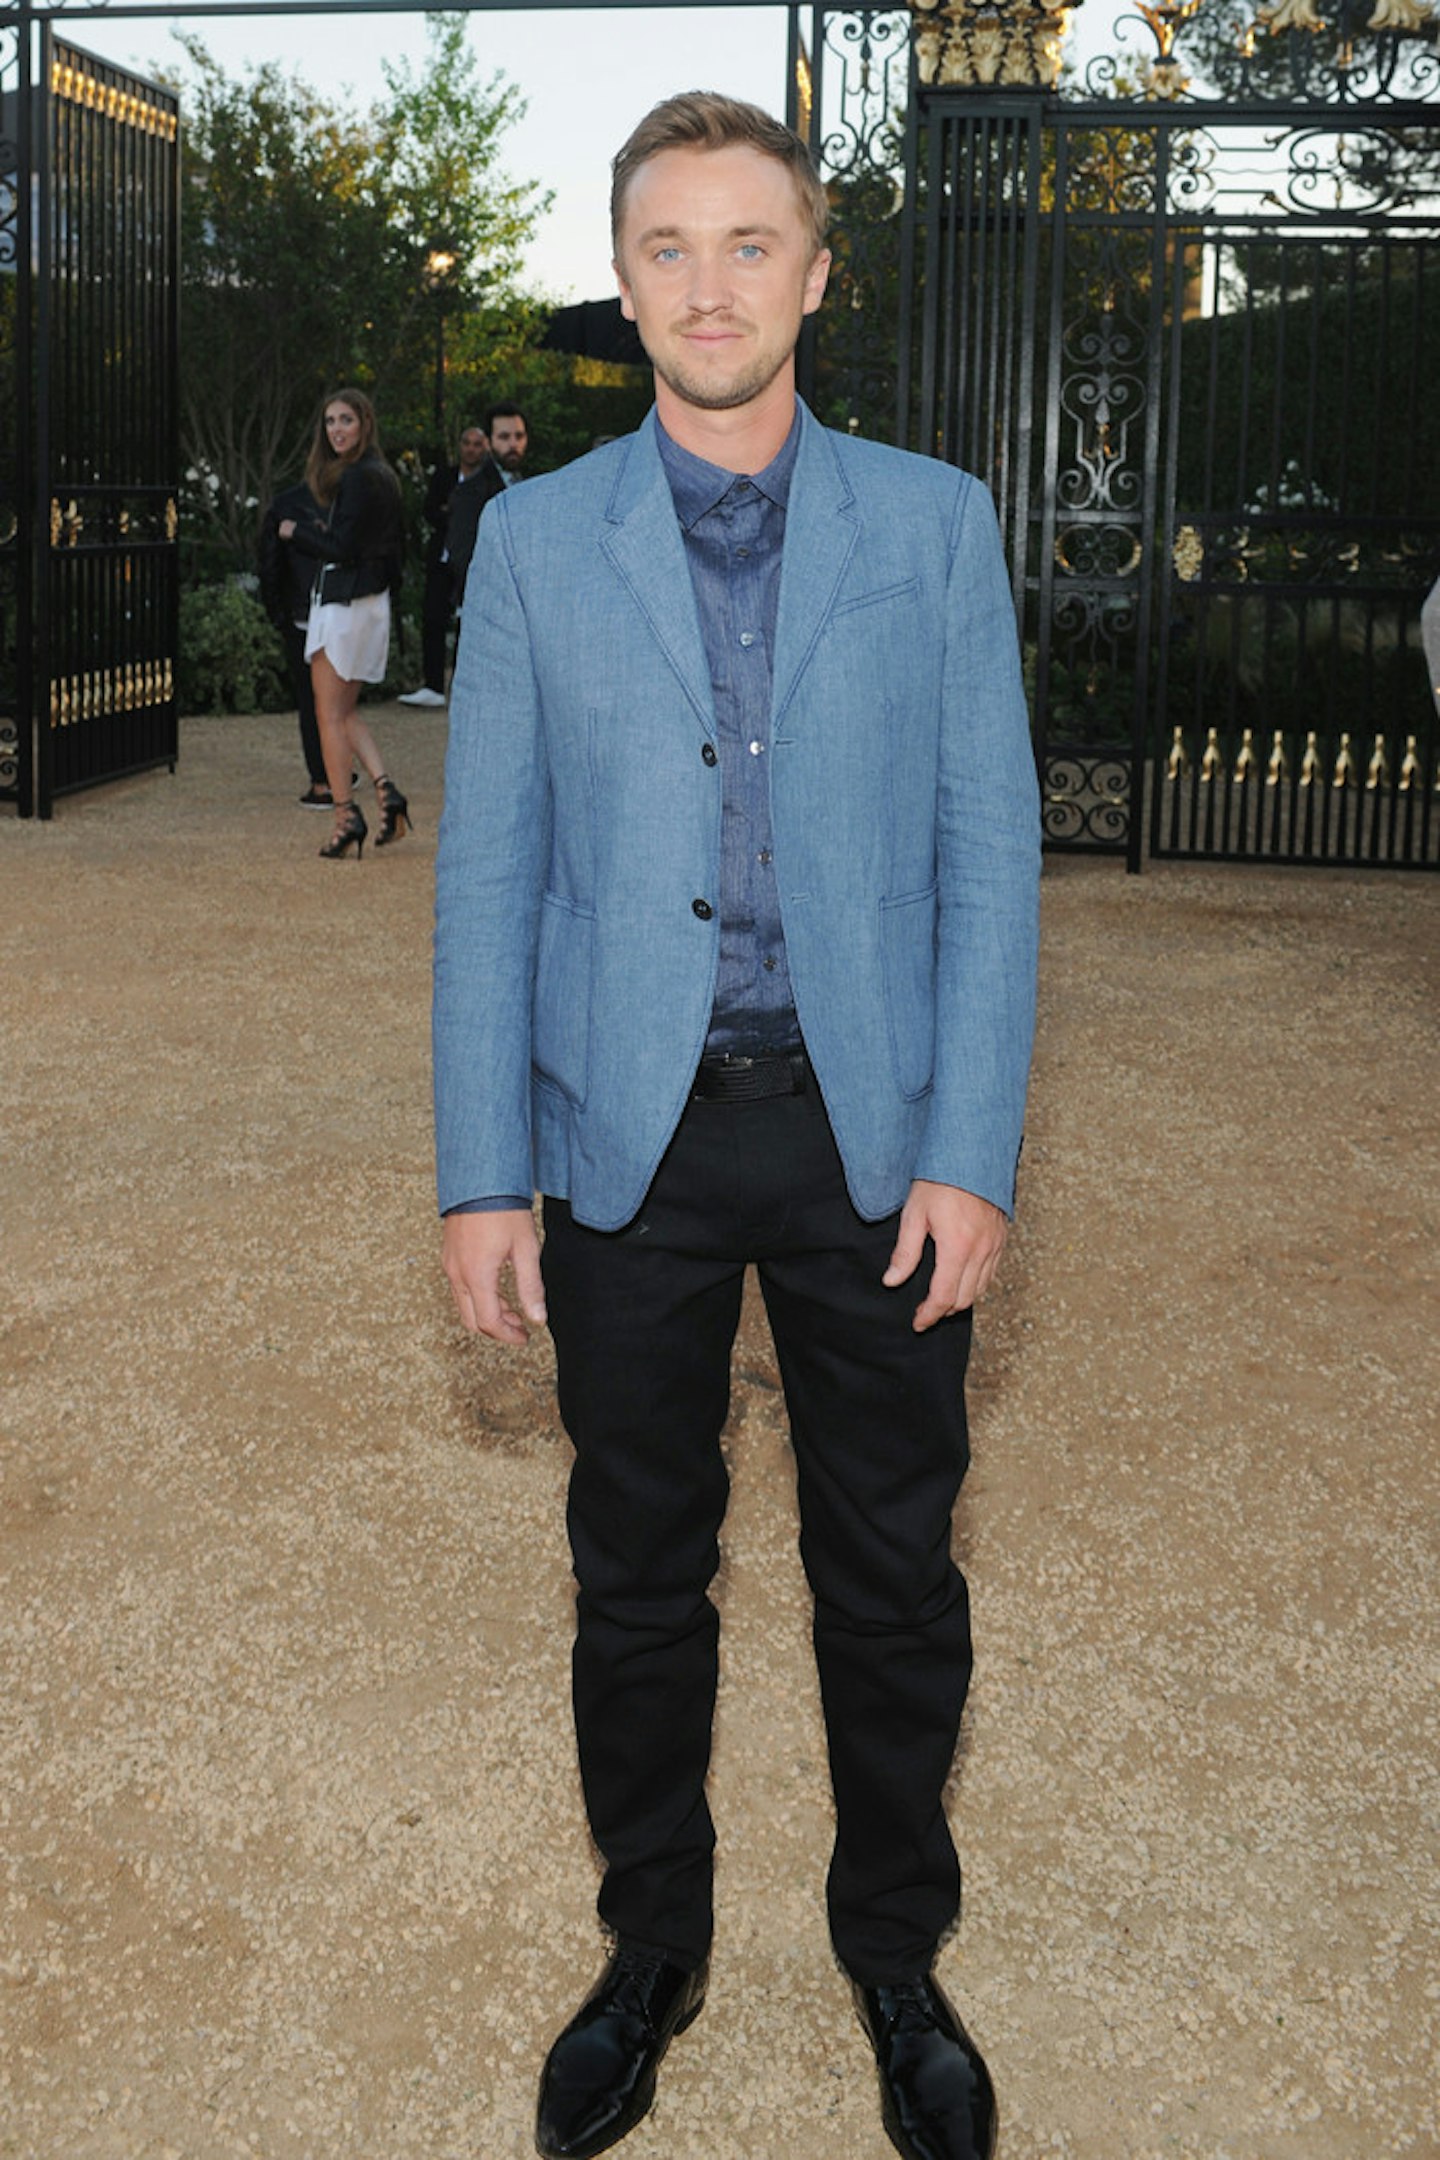 Tom Felton at the Burberry _London in Los Angeles_ event